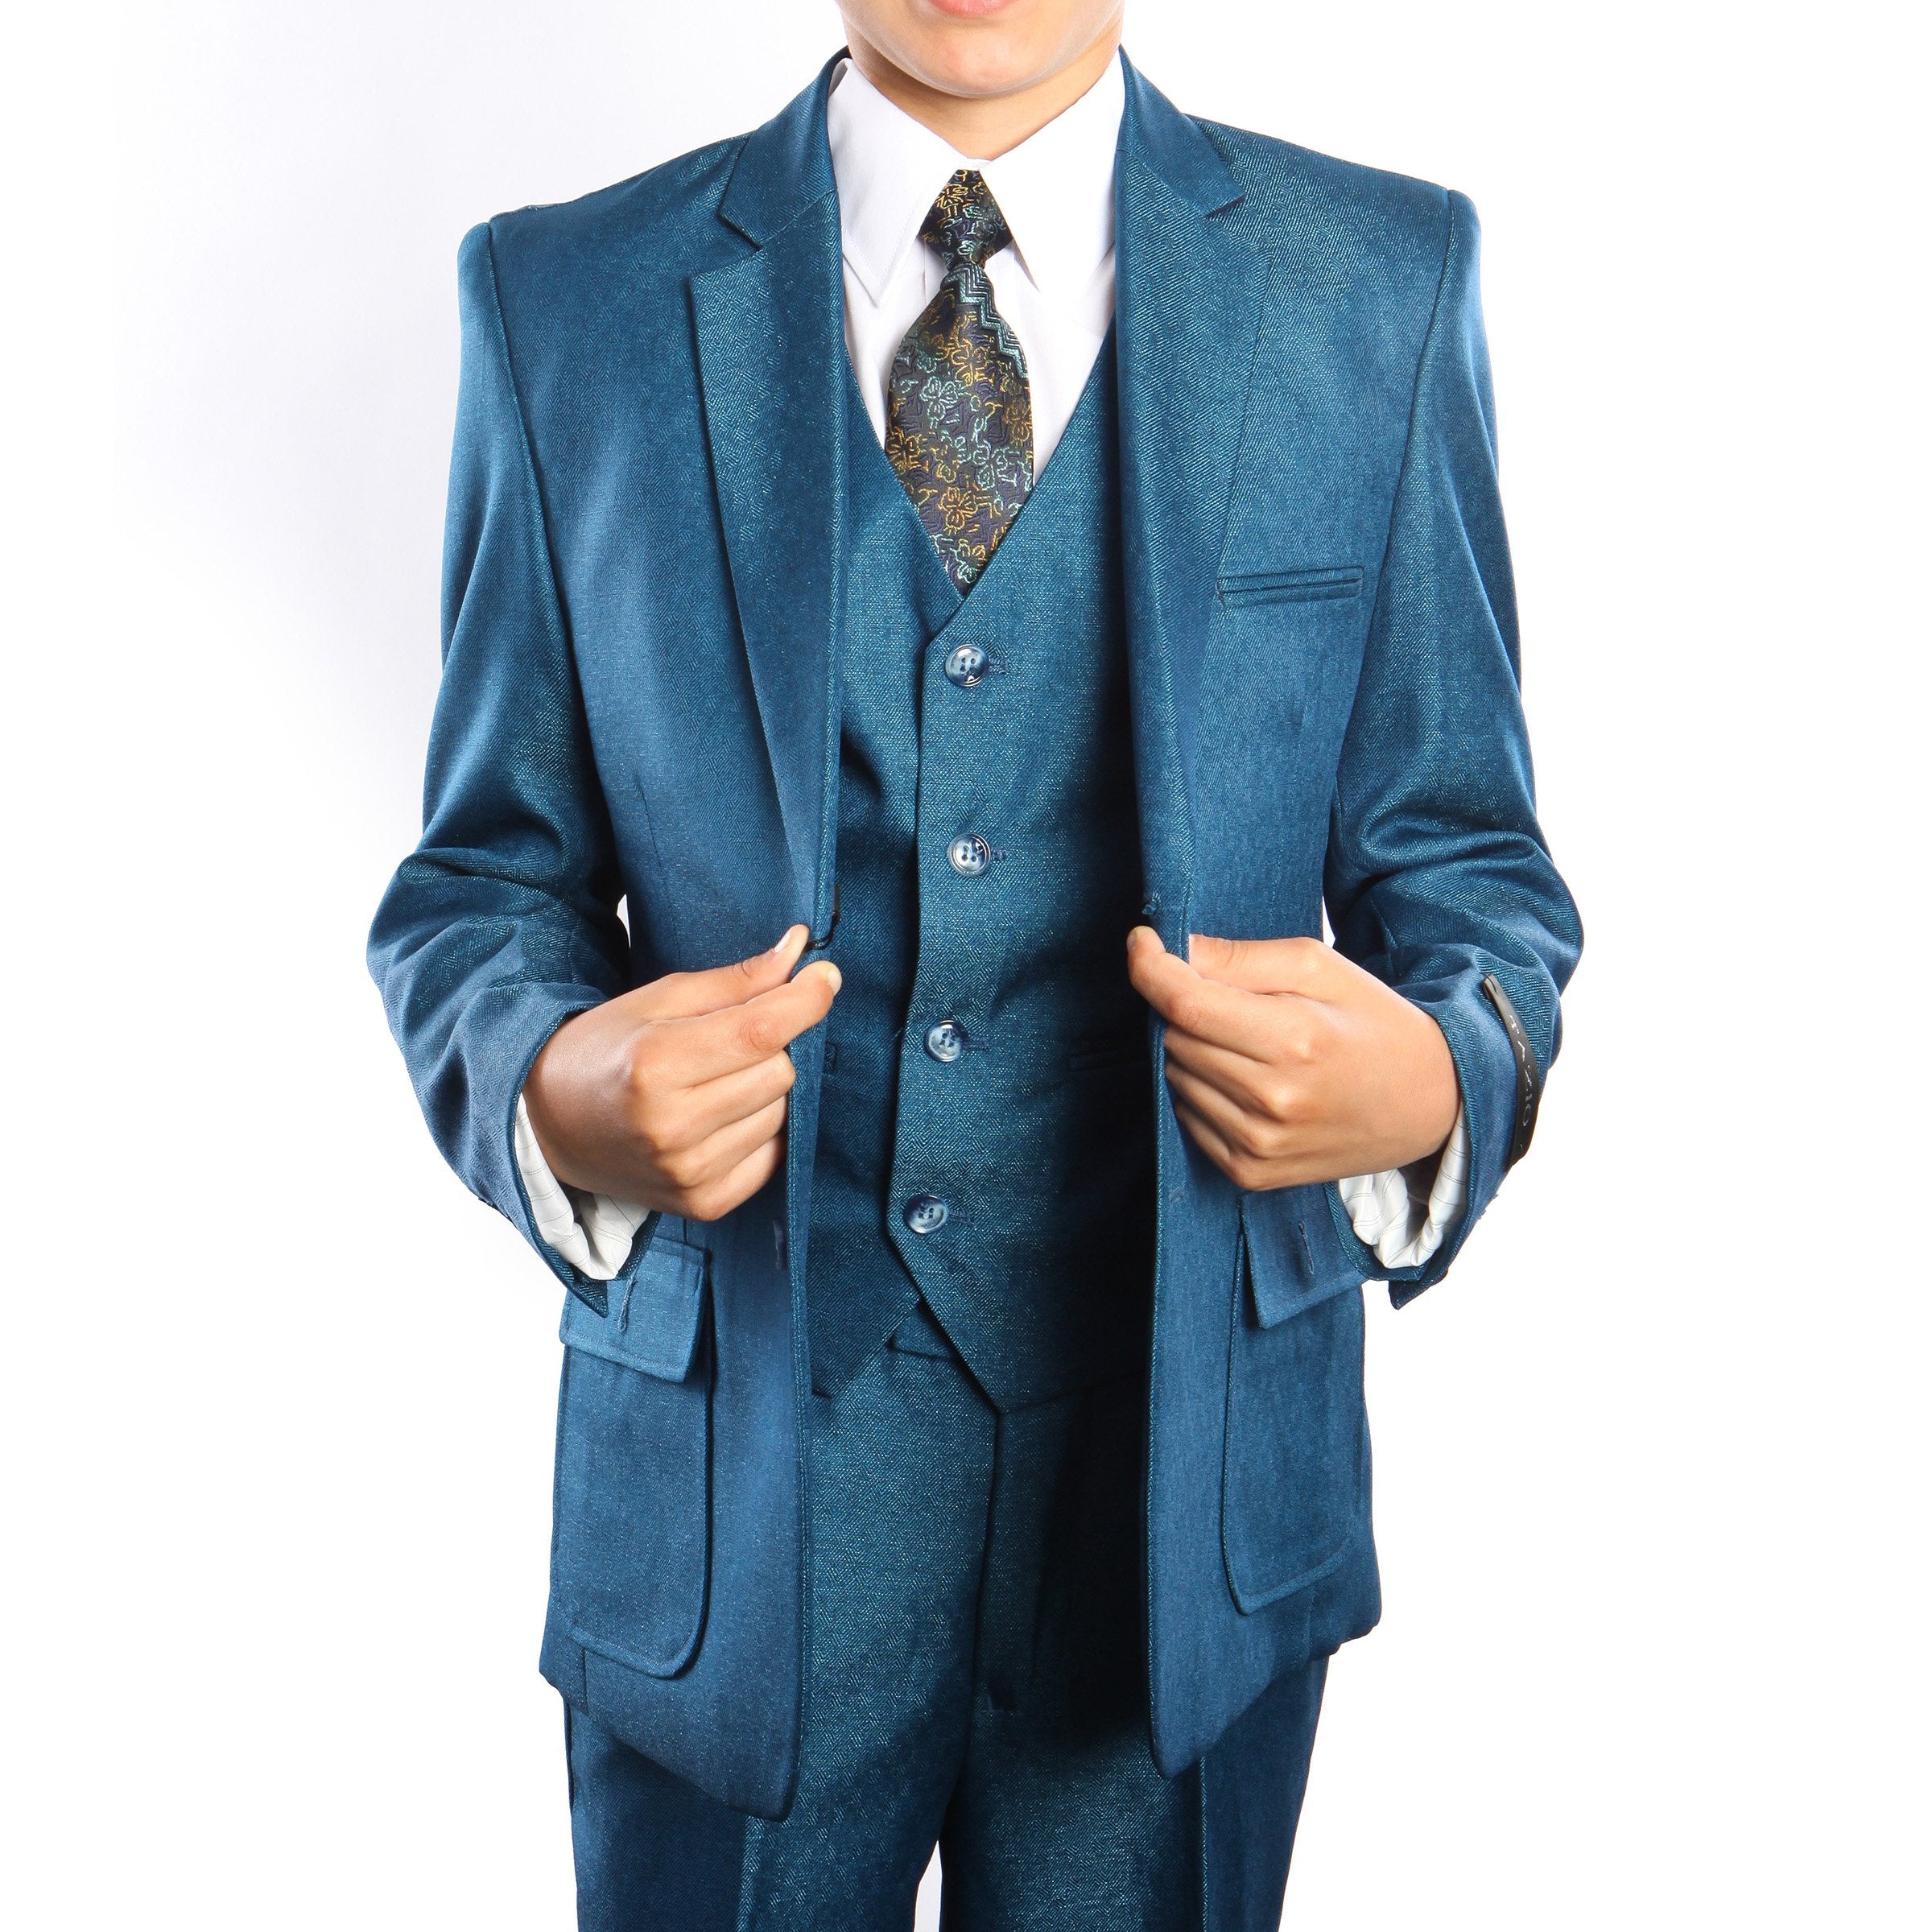 6-PC Solid Boys Suit with Shirt & Tie Suits For Boy's